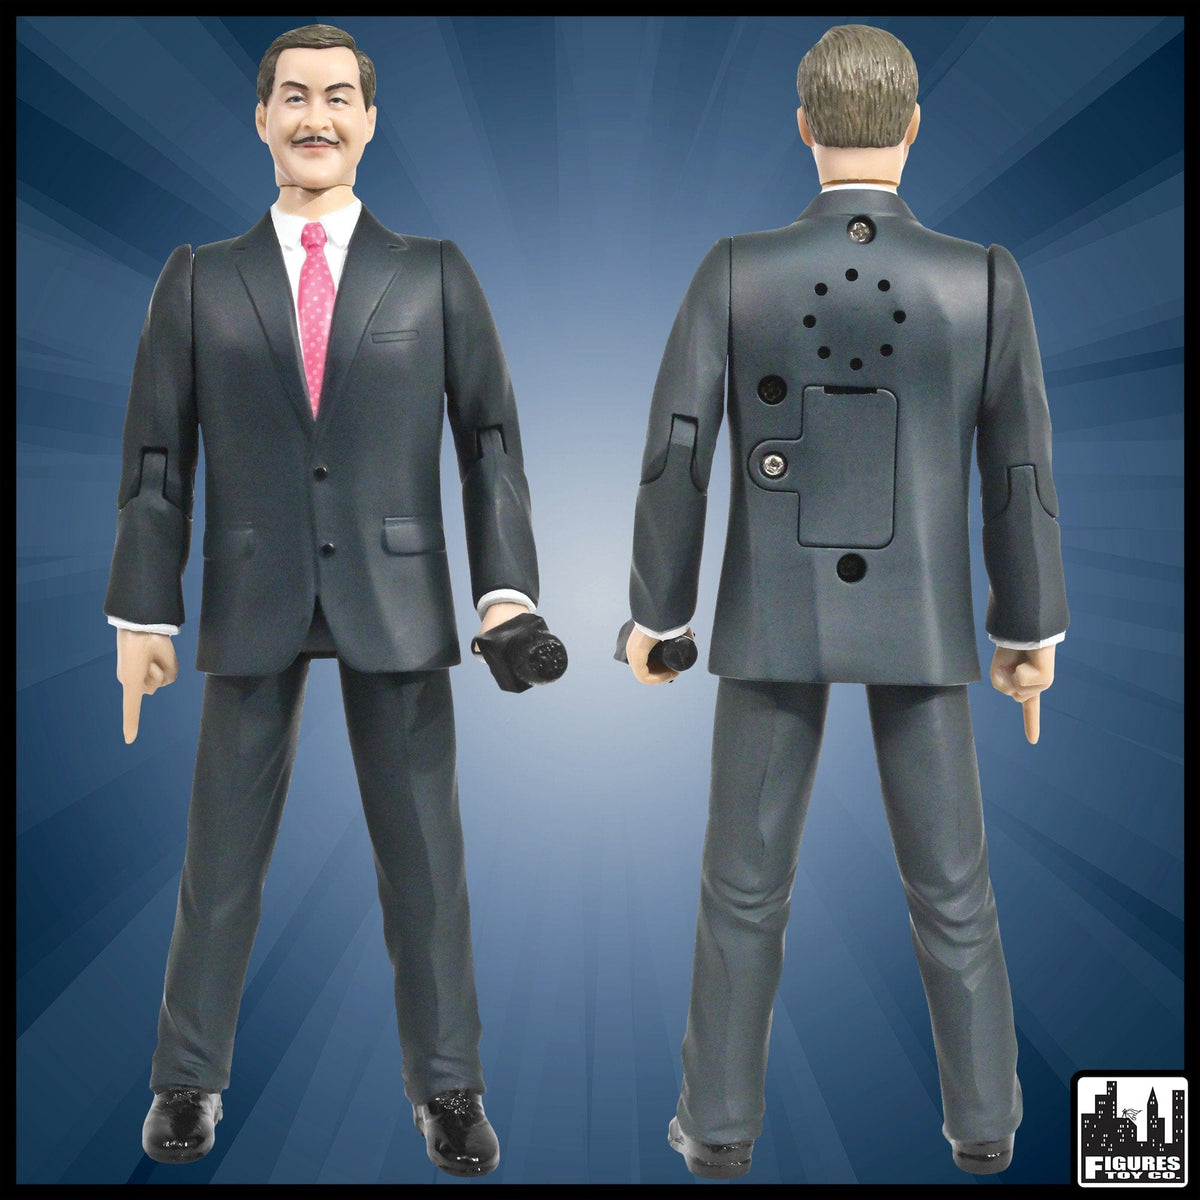 Talking Wrestling Ring Announcer Action Figure by Figures Toy Company